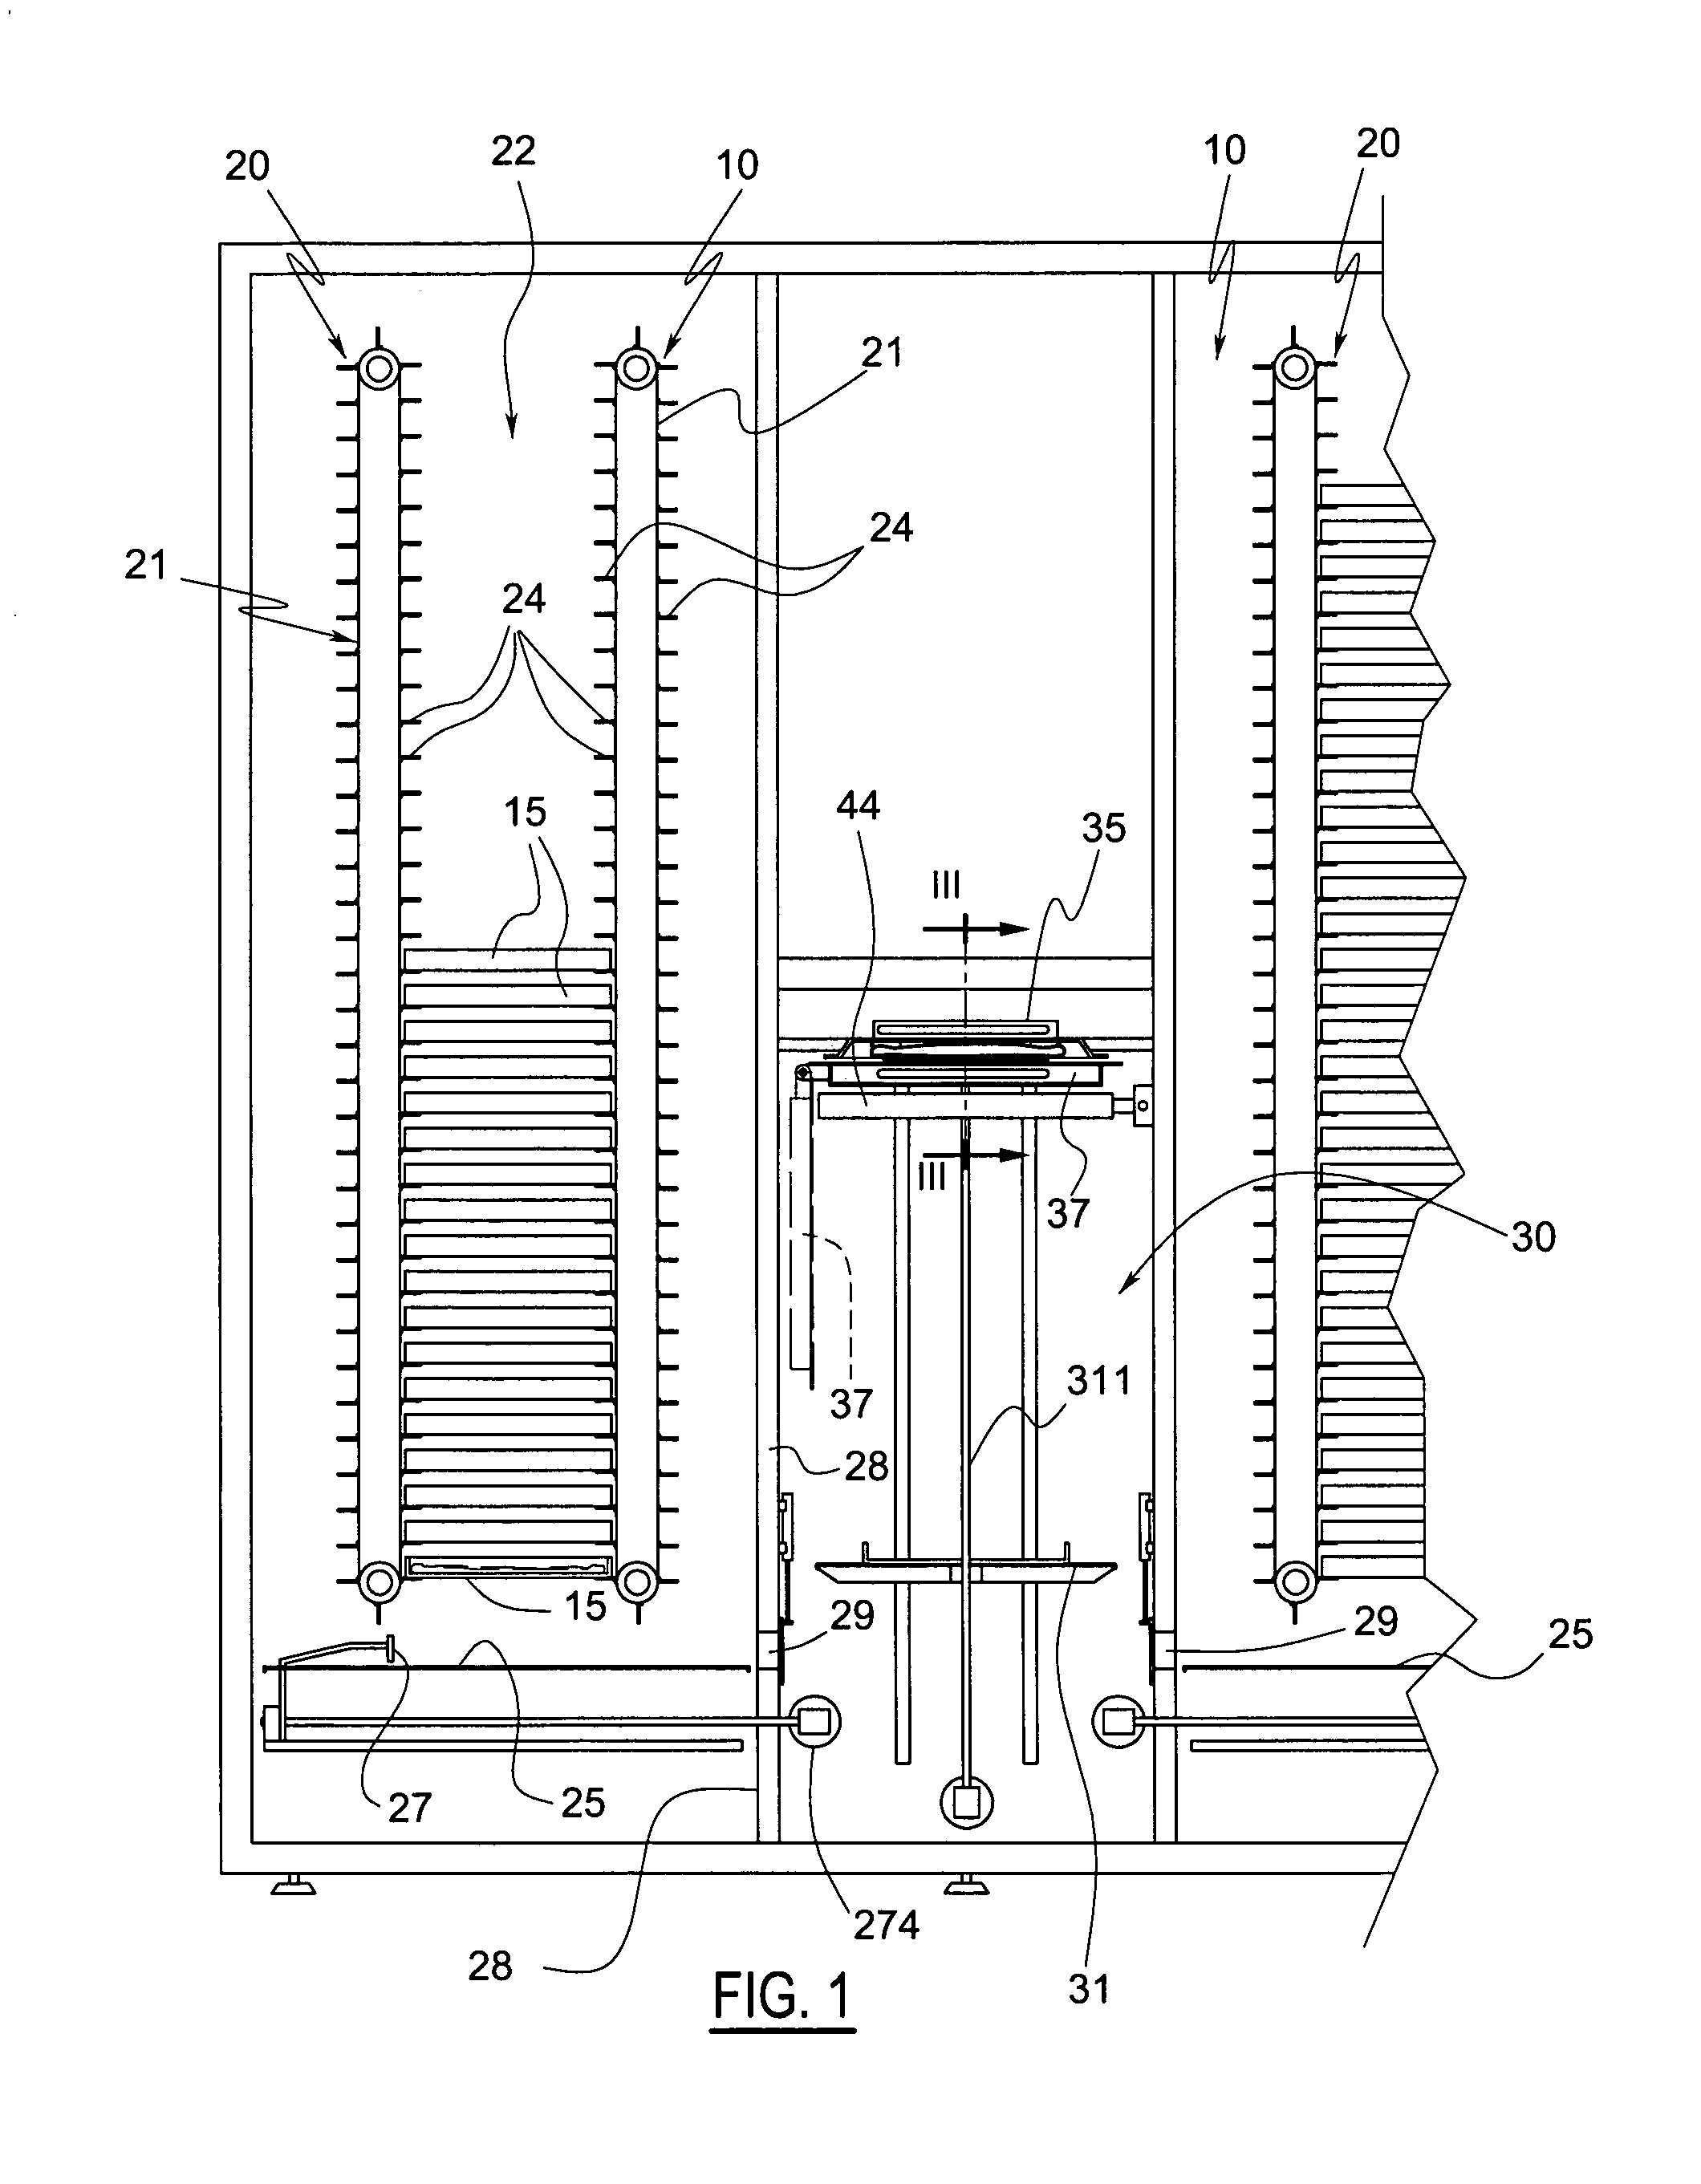 Automatic distributor apparatus for heated food products, such as pizzas or other products, and an operating method